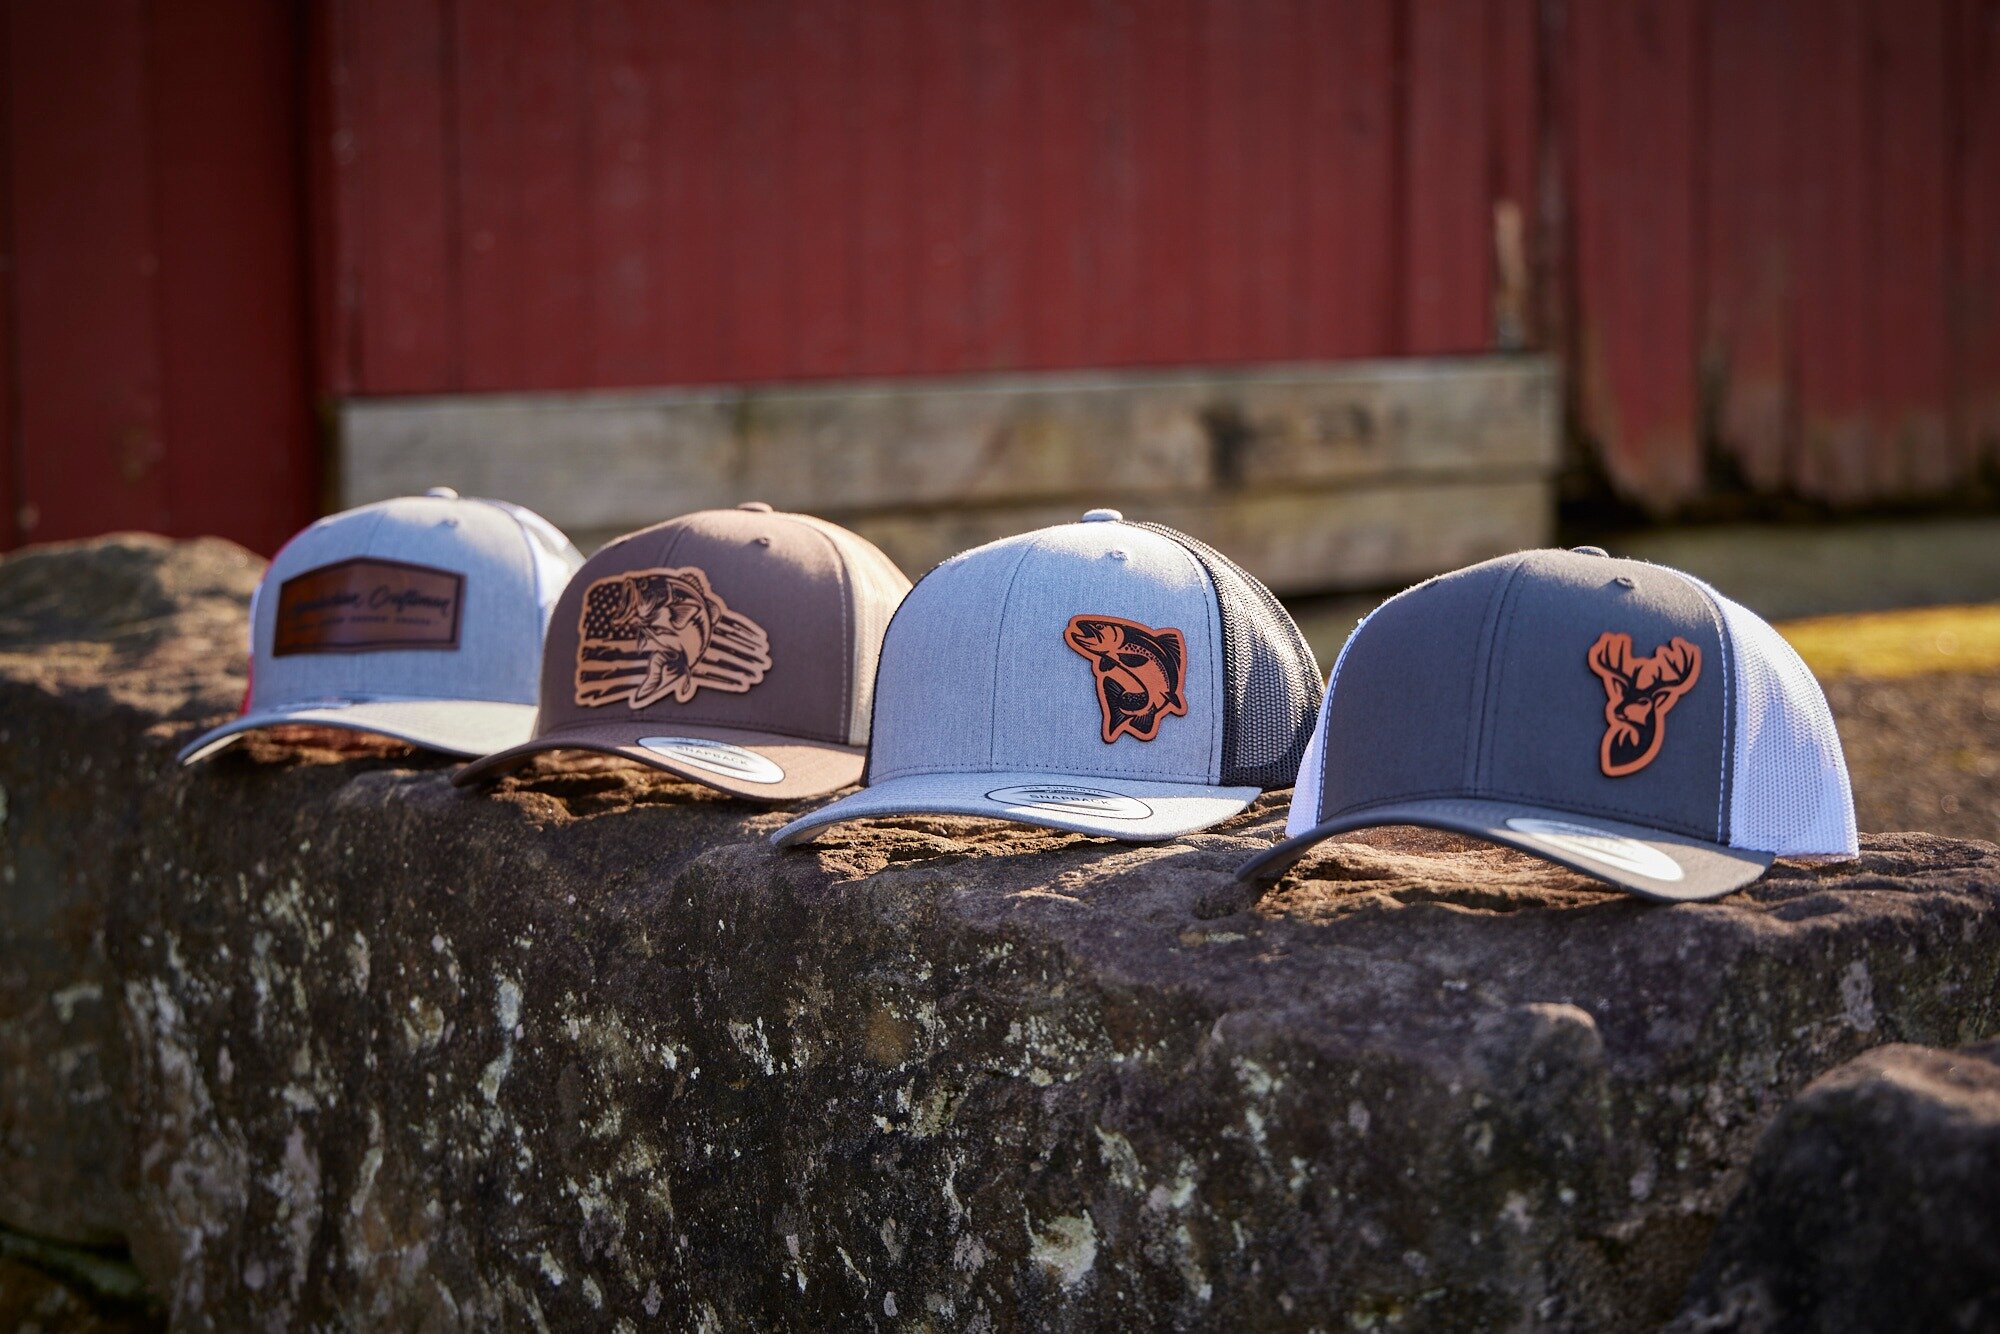 New! Leather patch hats! Our wildlife collection offers our unique and classy take on a traditional product. We select and dye the leather ourself, and best of all - no minimums! Reach out today for a custom order with your company logo, yes, we can 